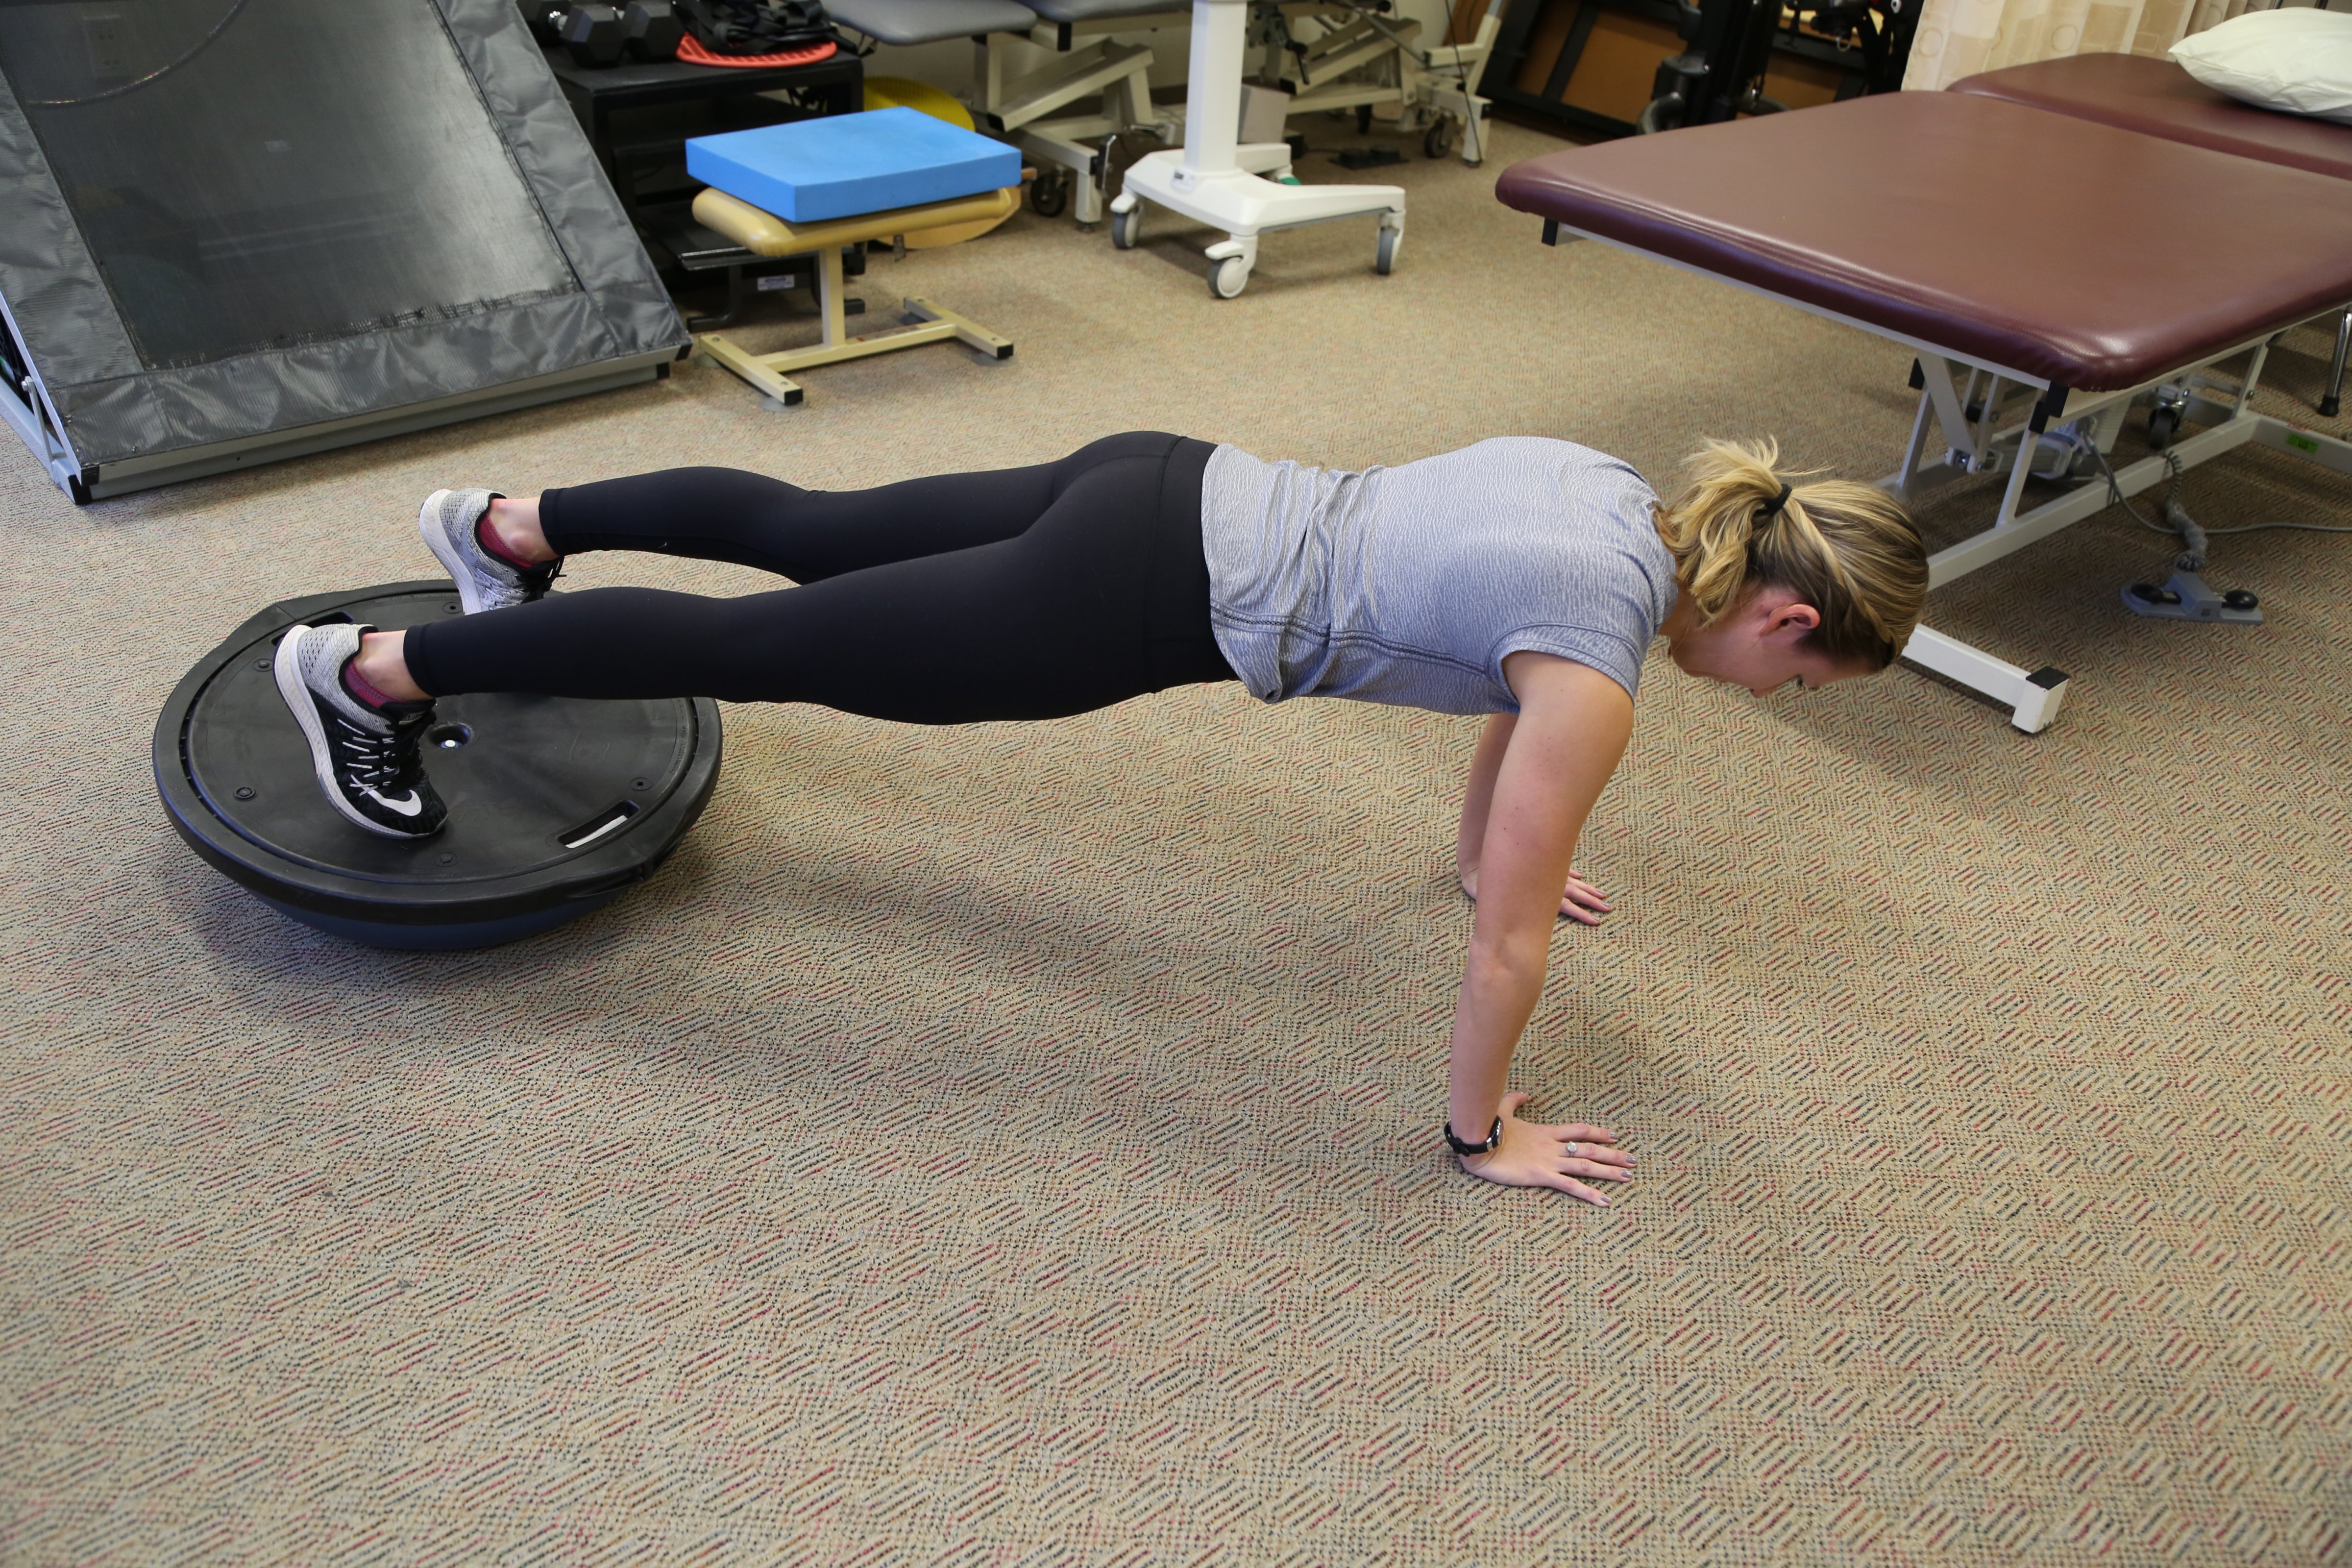 Planks, especially on uneven surfaces, fire up the deep core. (Photo via Ohio State University Wexler Medical Center.)